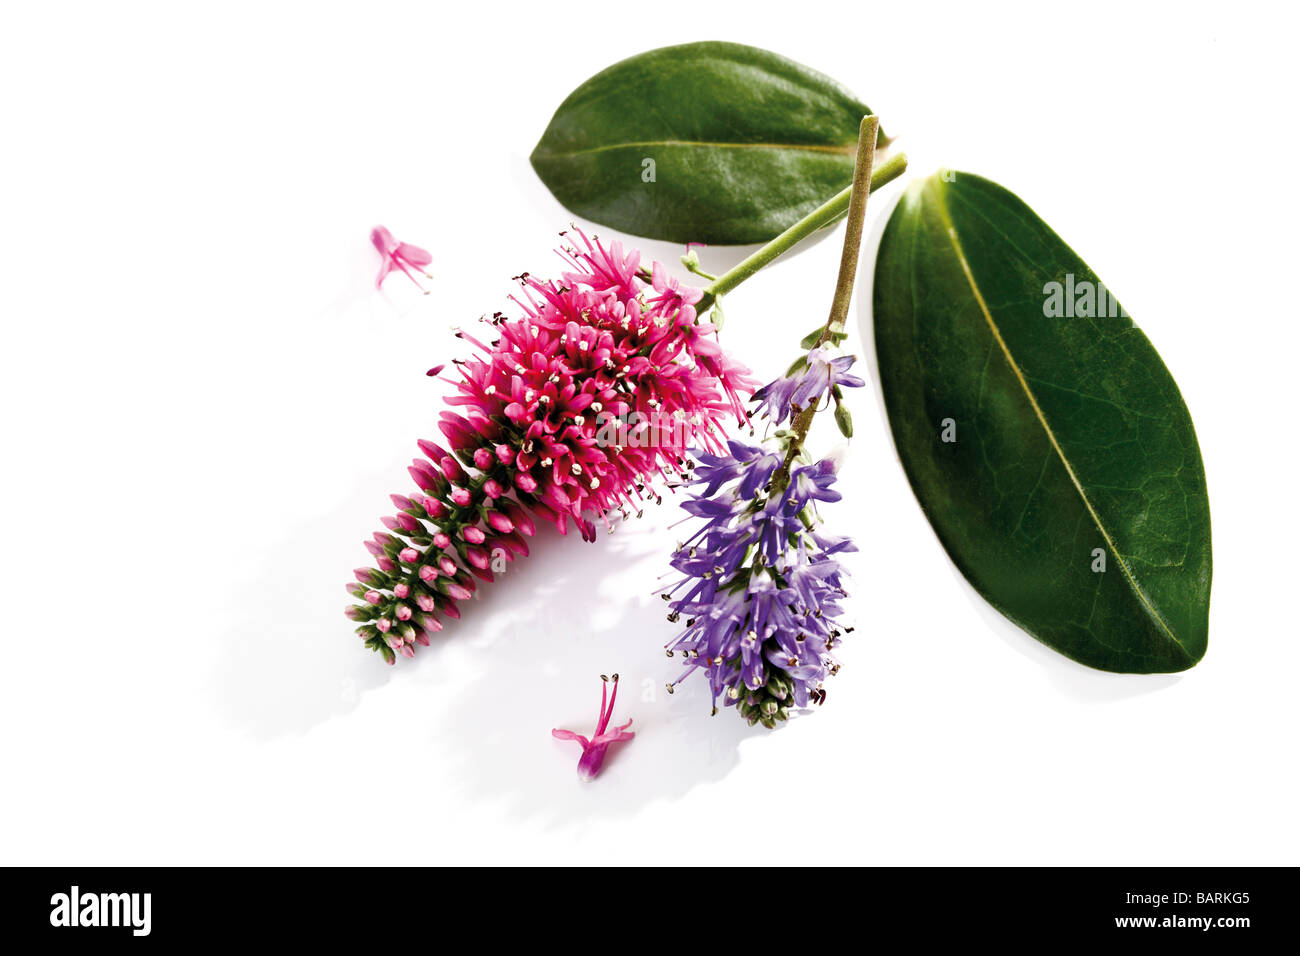 Hebe plant in blossom, elevated view Stock Photo